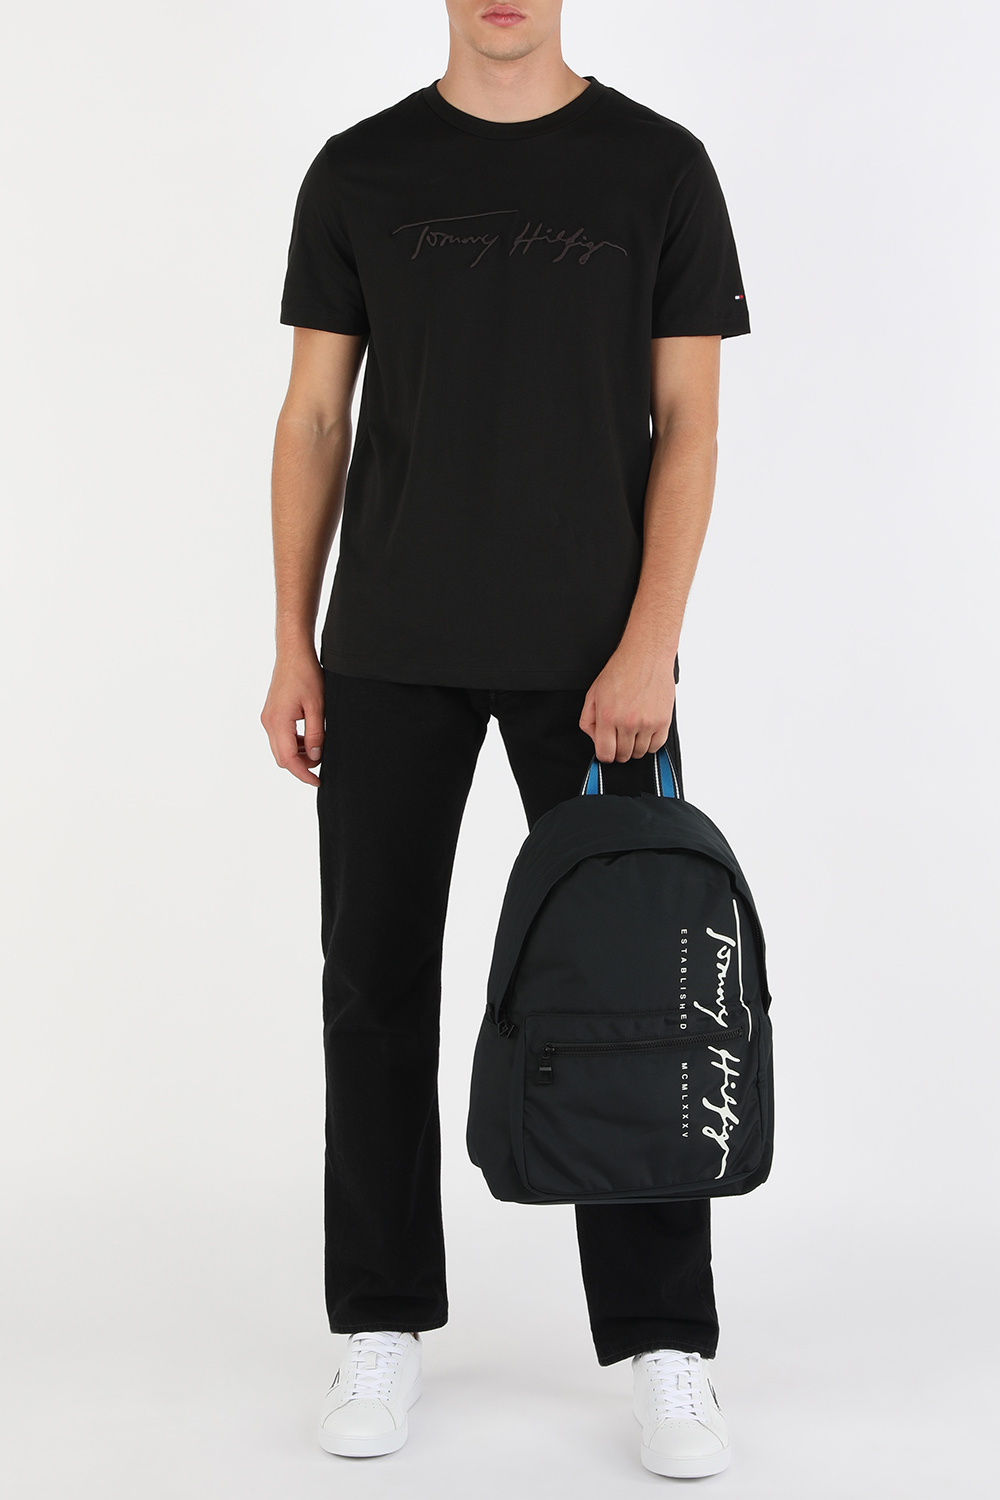 Th Signature Backpack in Black Recycled Textile TOMMY HILFIGER